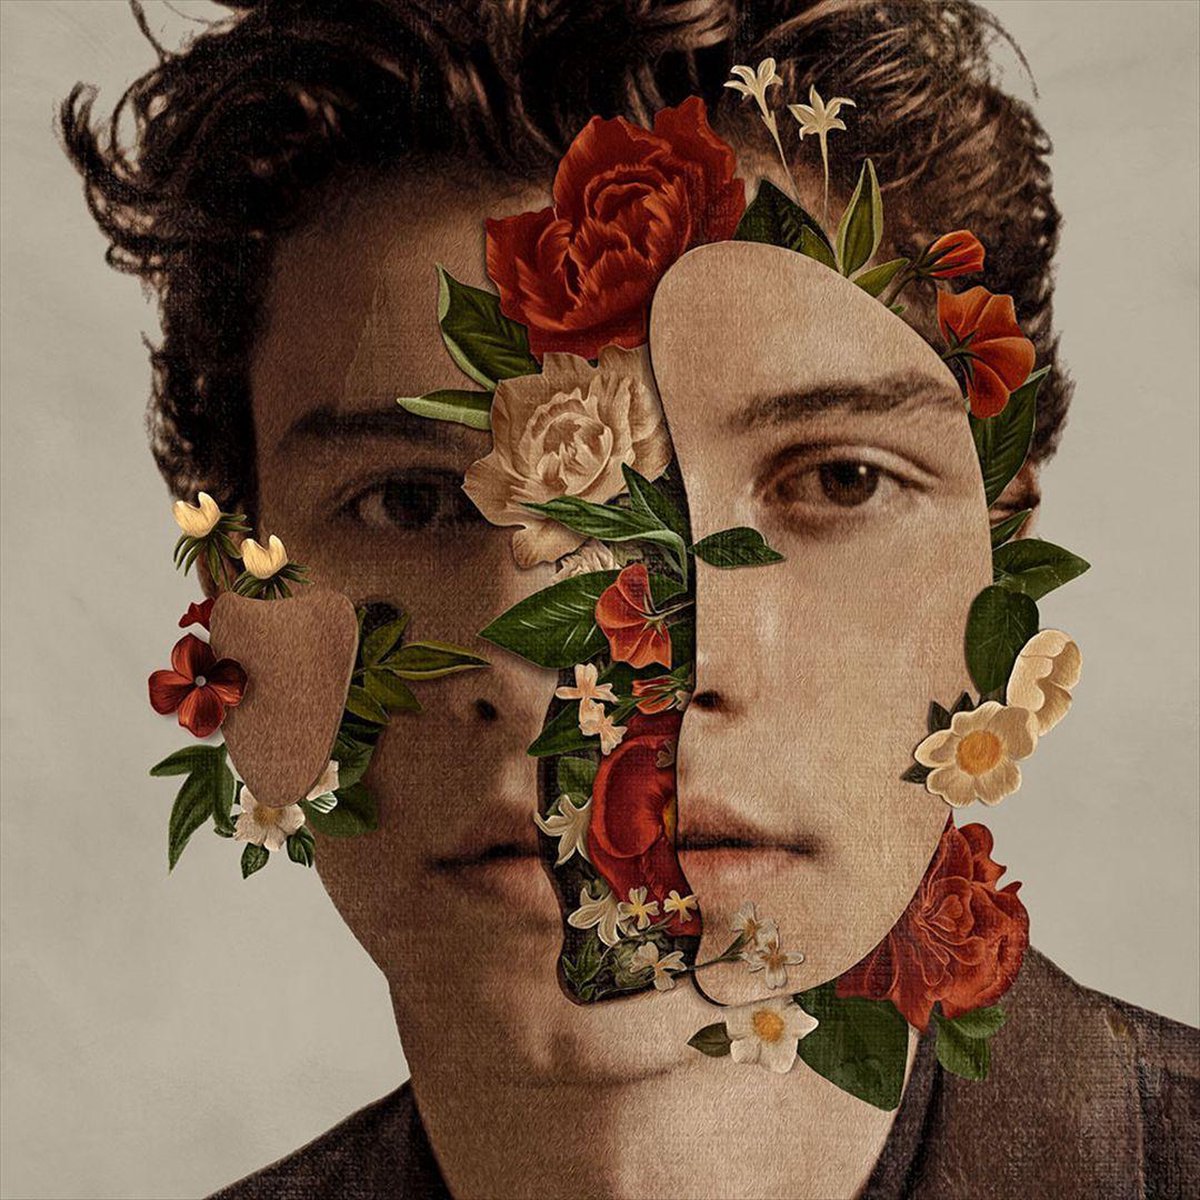 Shawn Mendes (Deluxe Edition) - Shawn Mendes